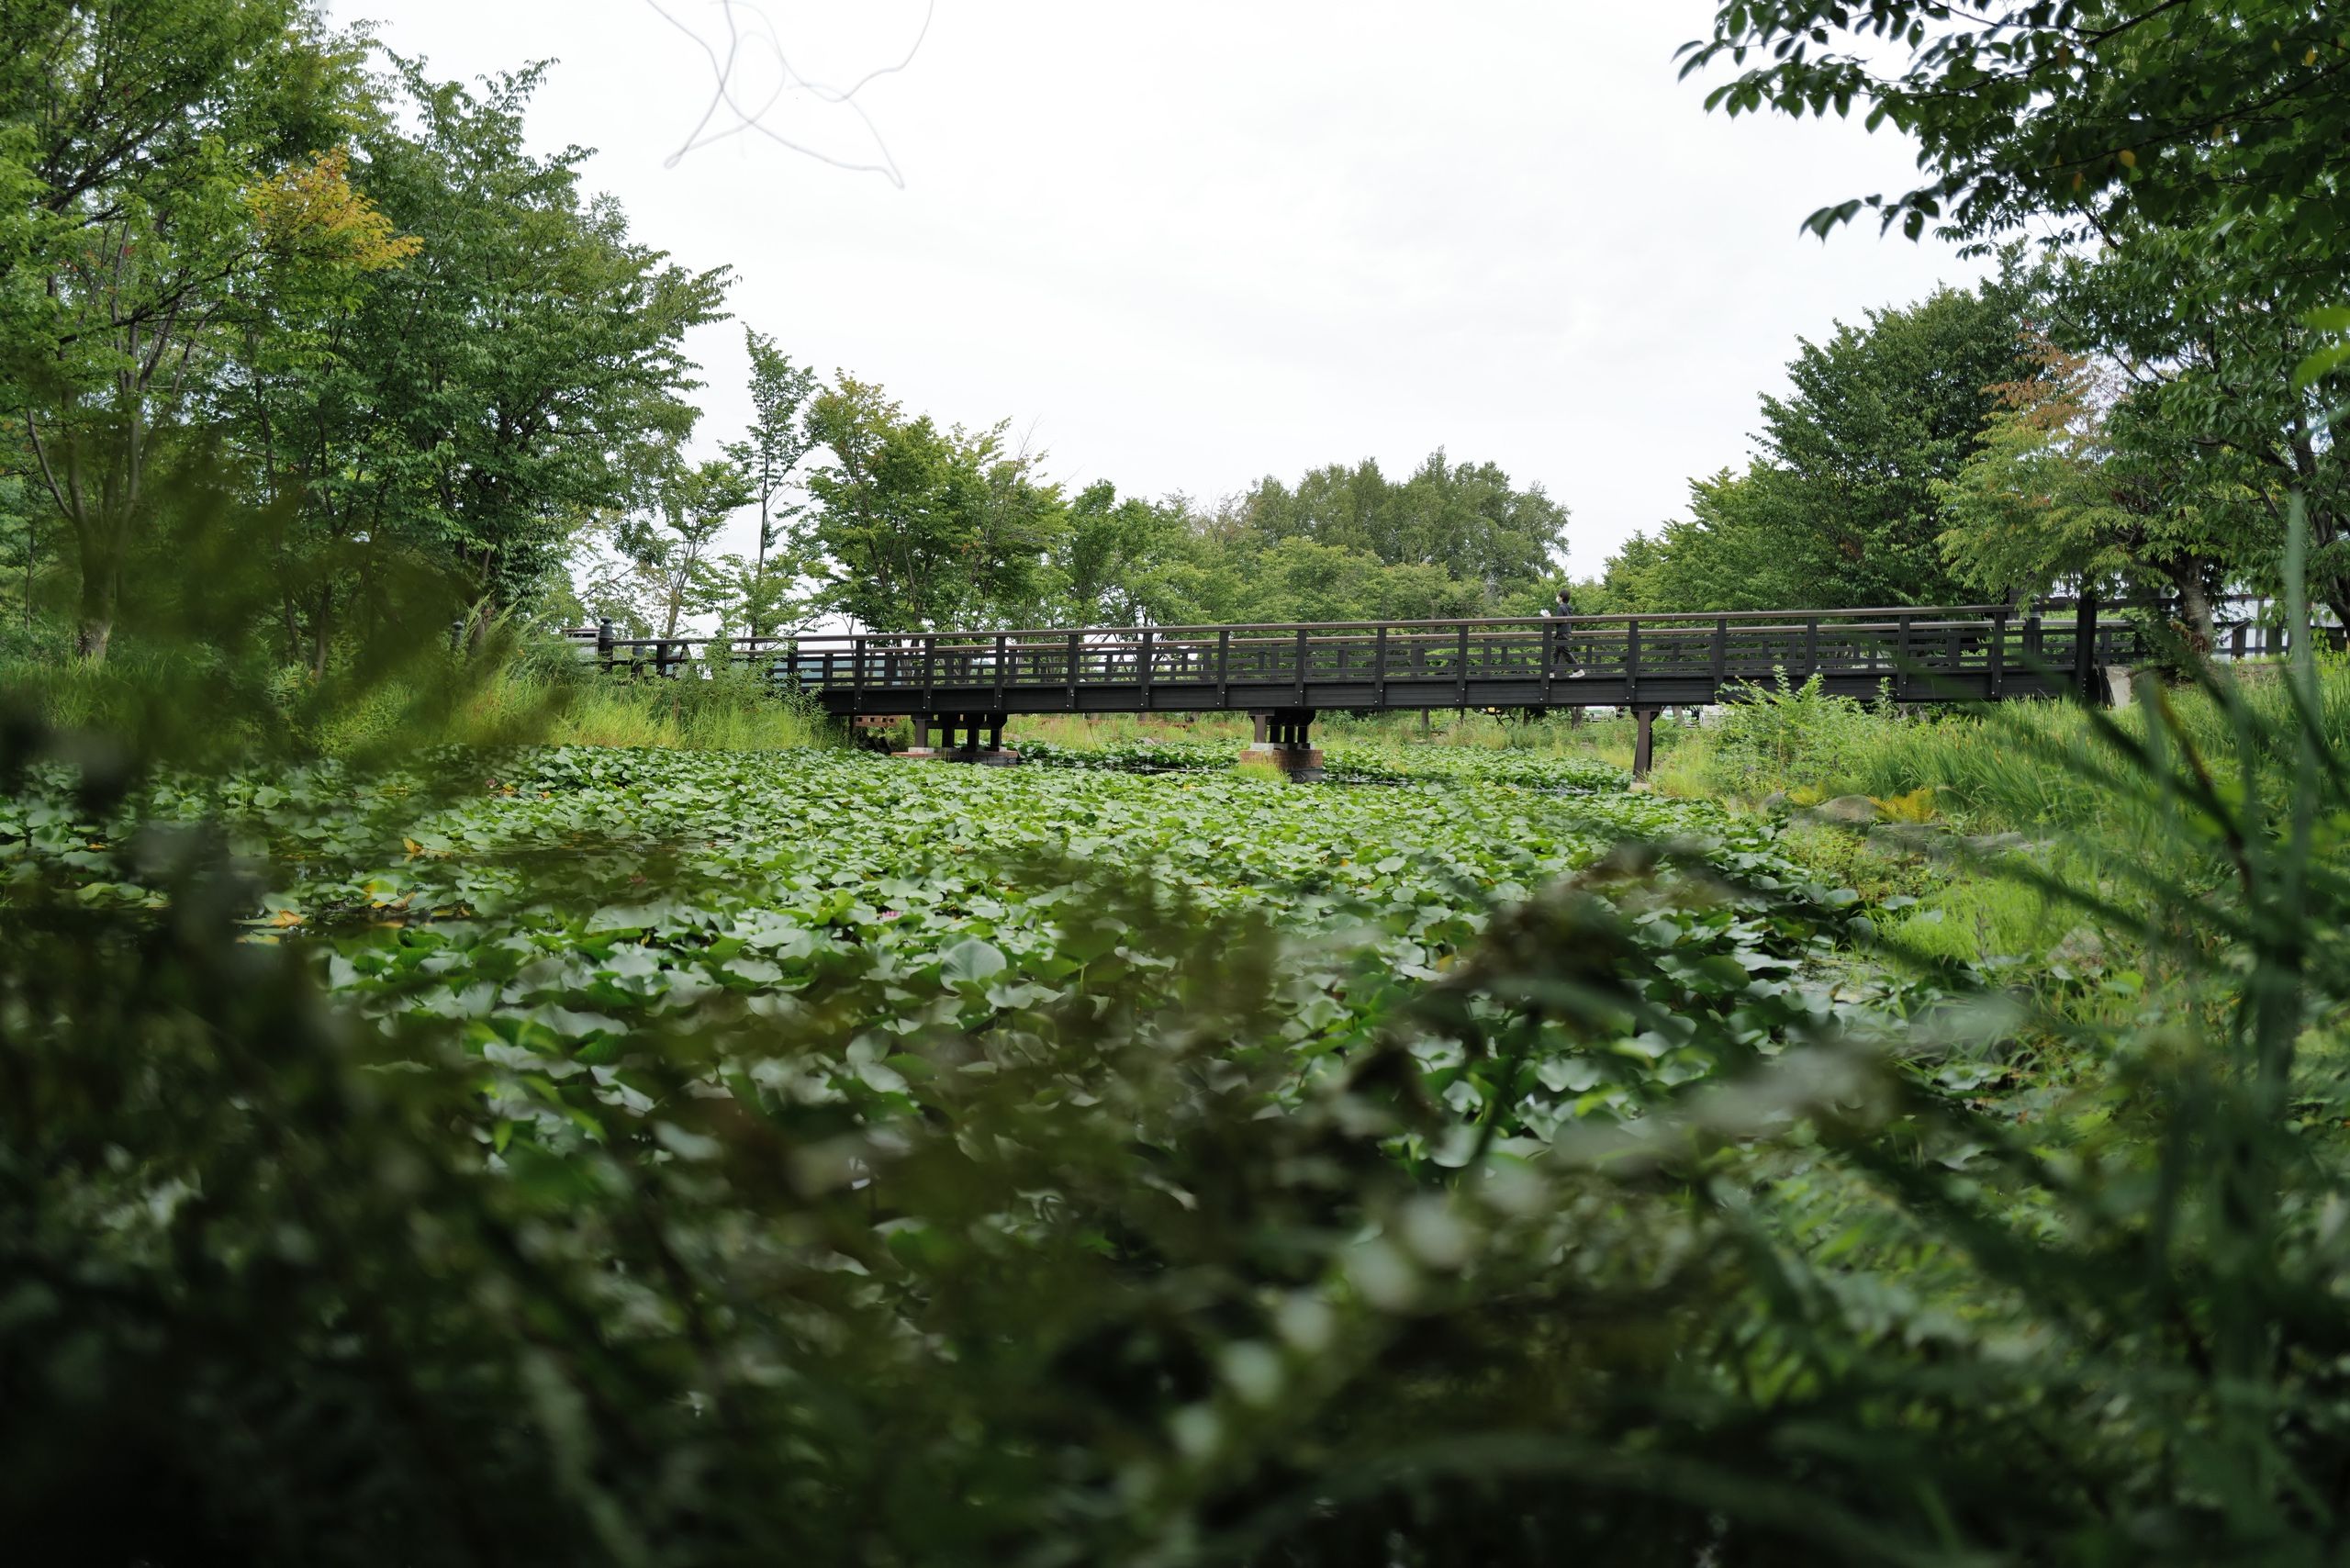 A man walks across a bridge over a pond covered with greenery